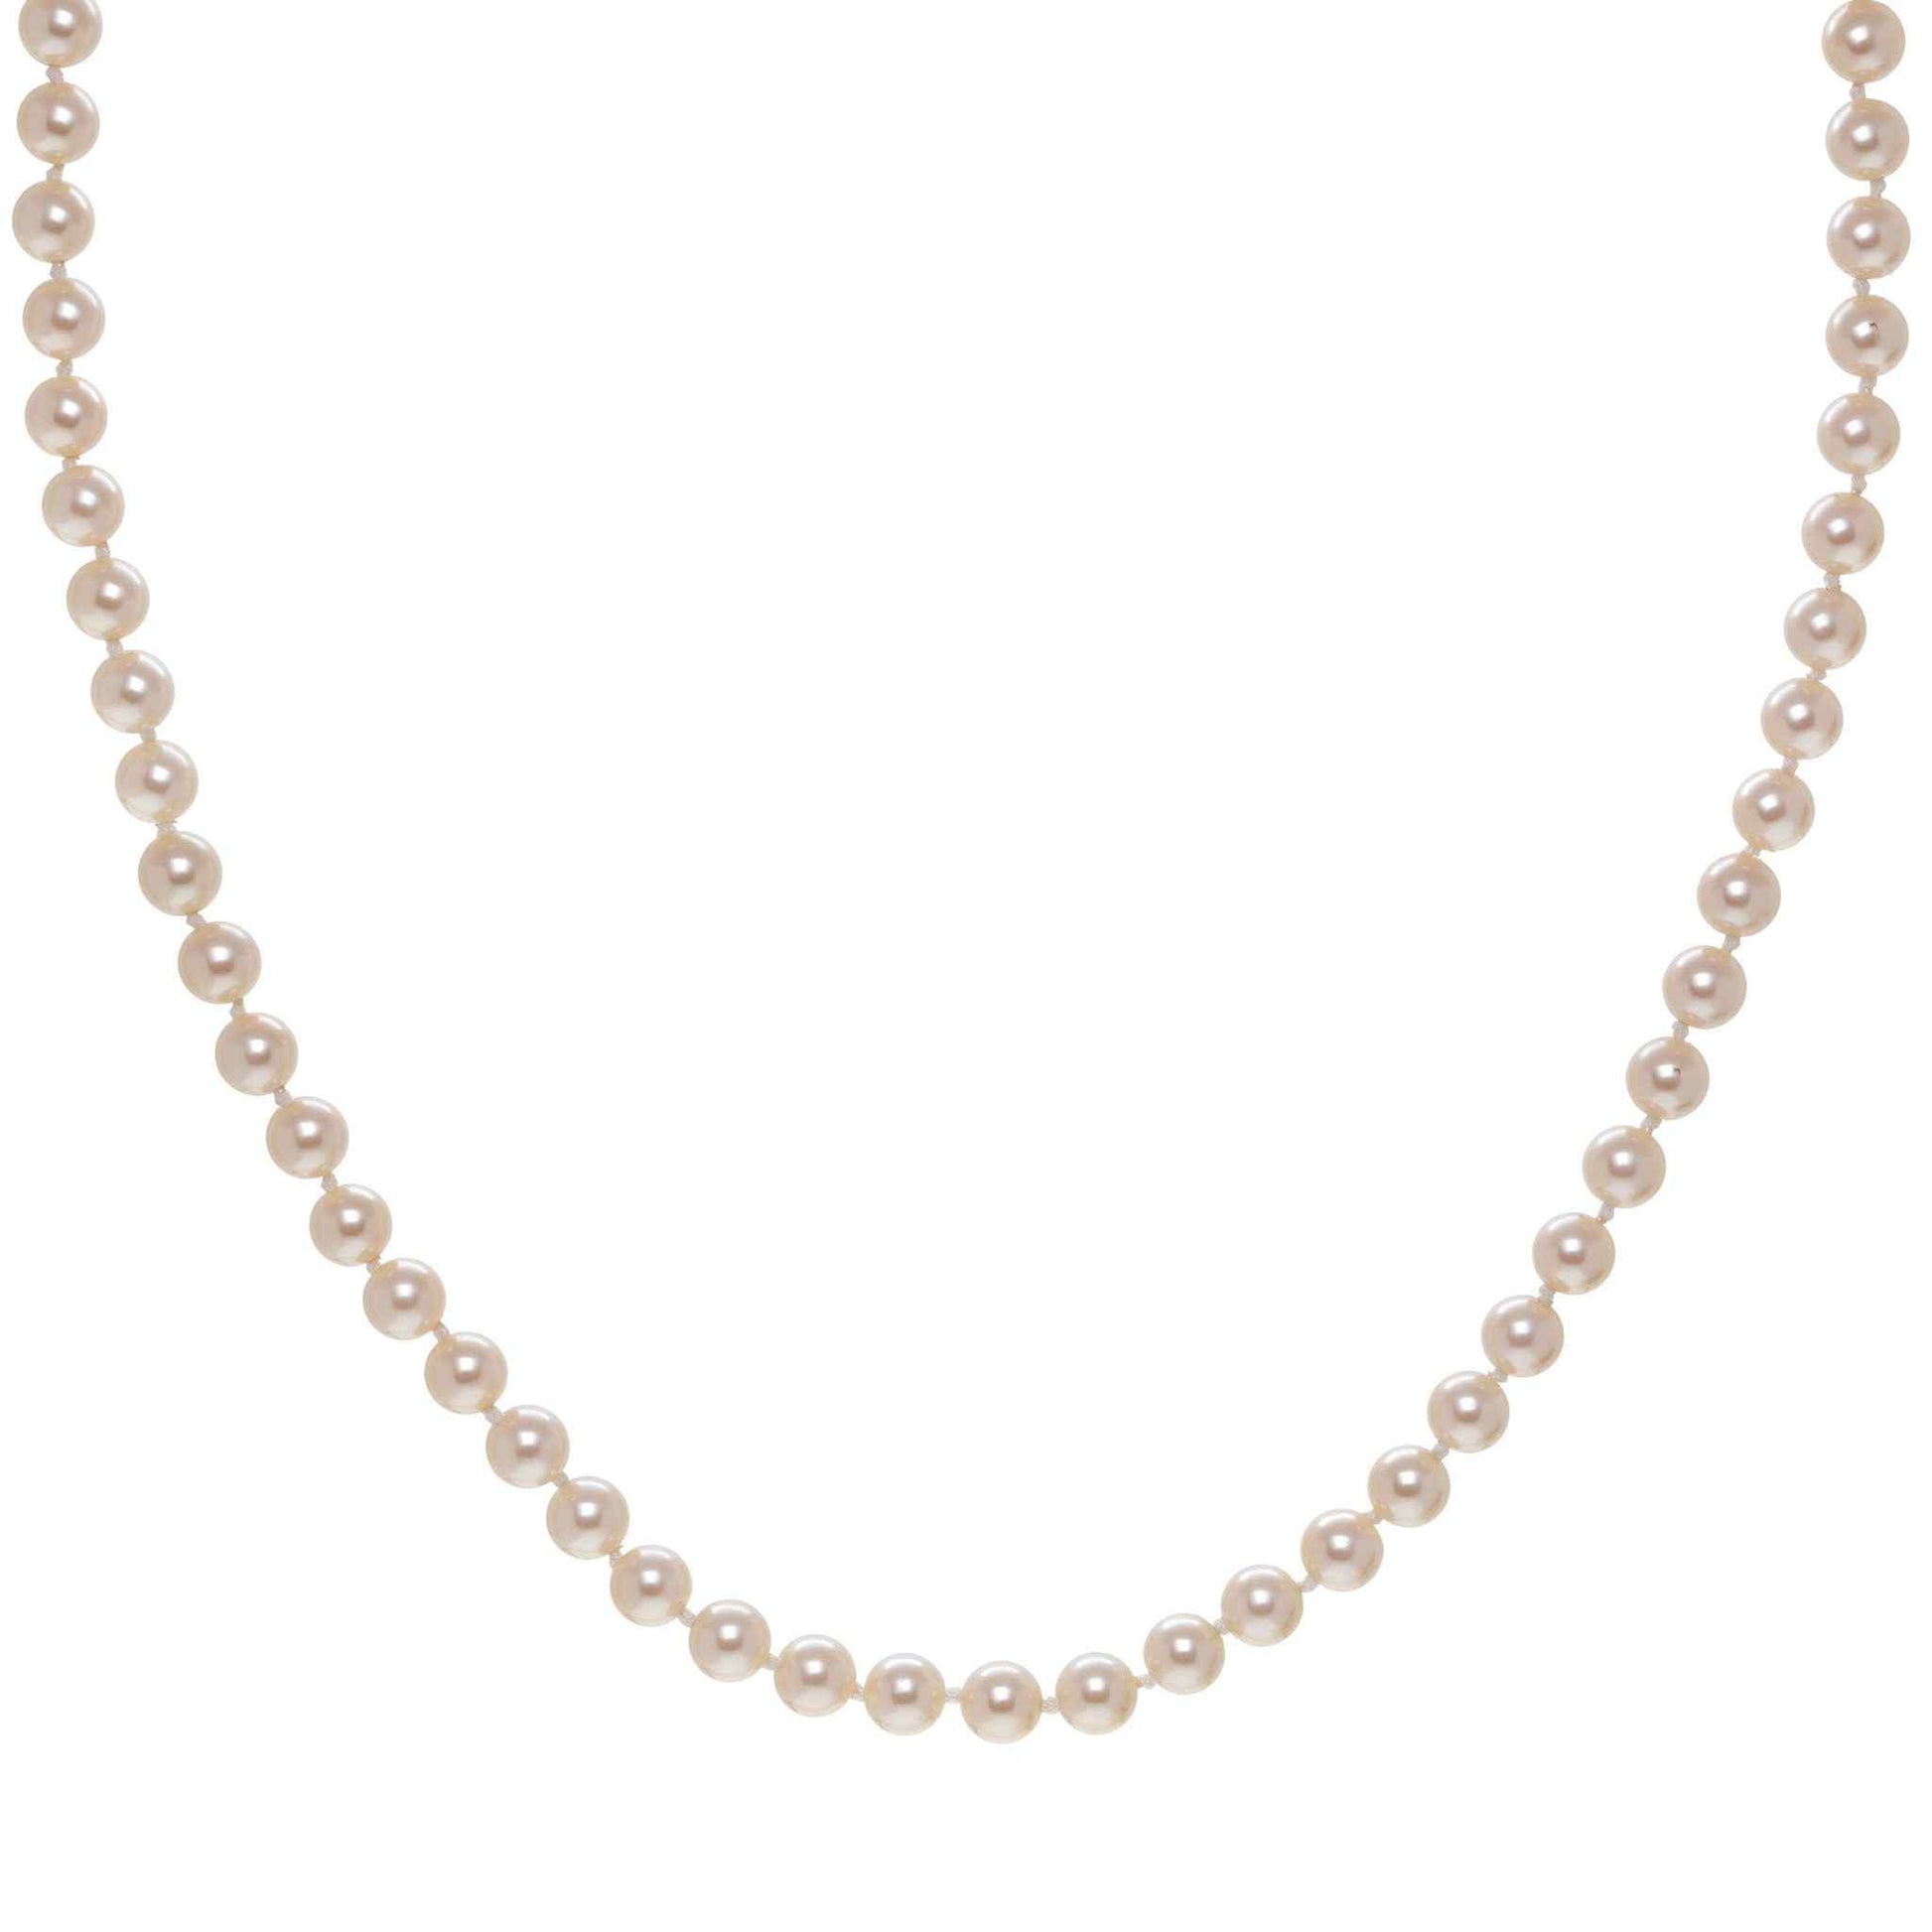 A knotted black glass pearl necklace displayed on a neutral white background.